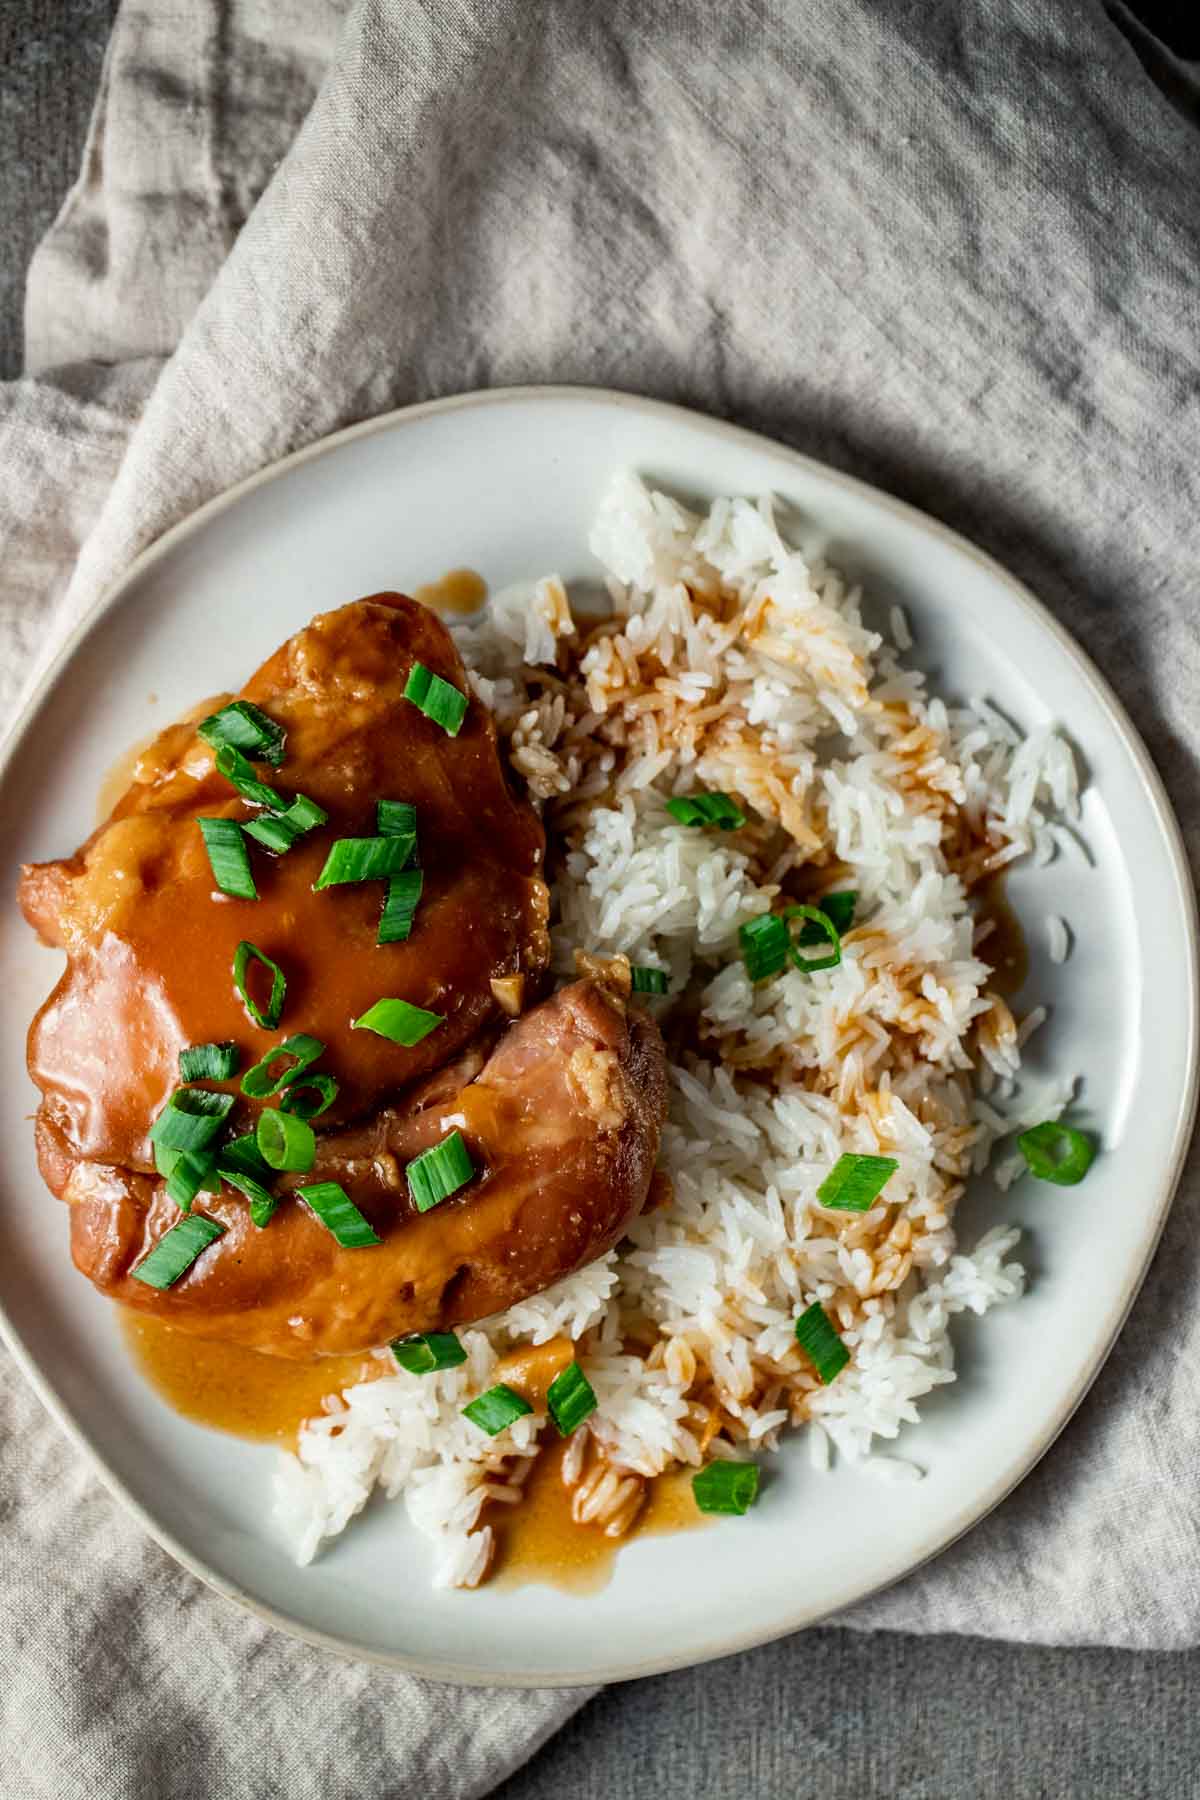 Overhead view of a sous vide teriyaki chicken thigh on a plate with rice.